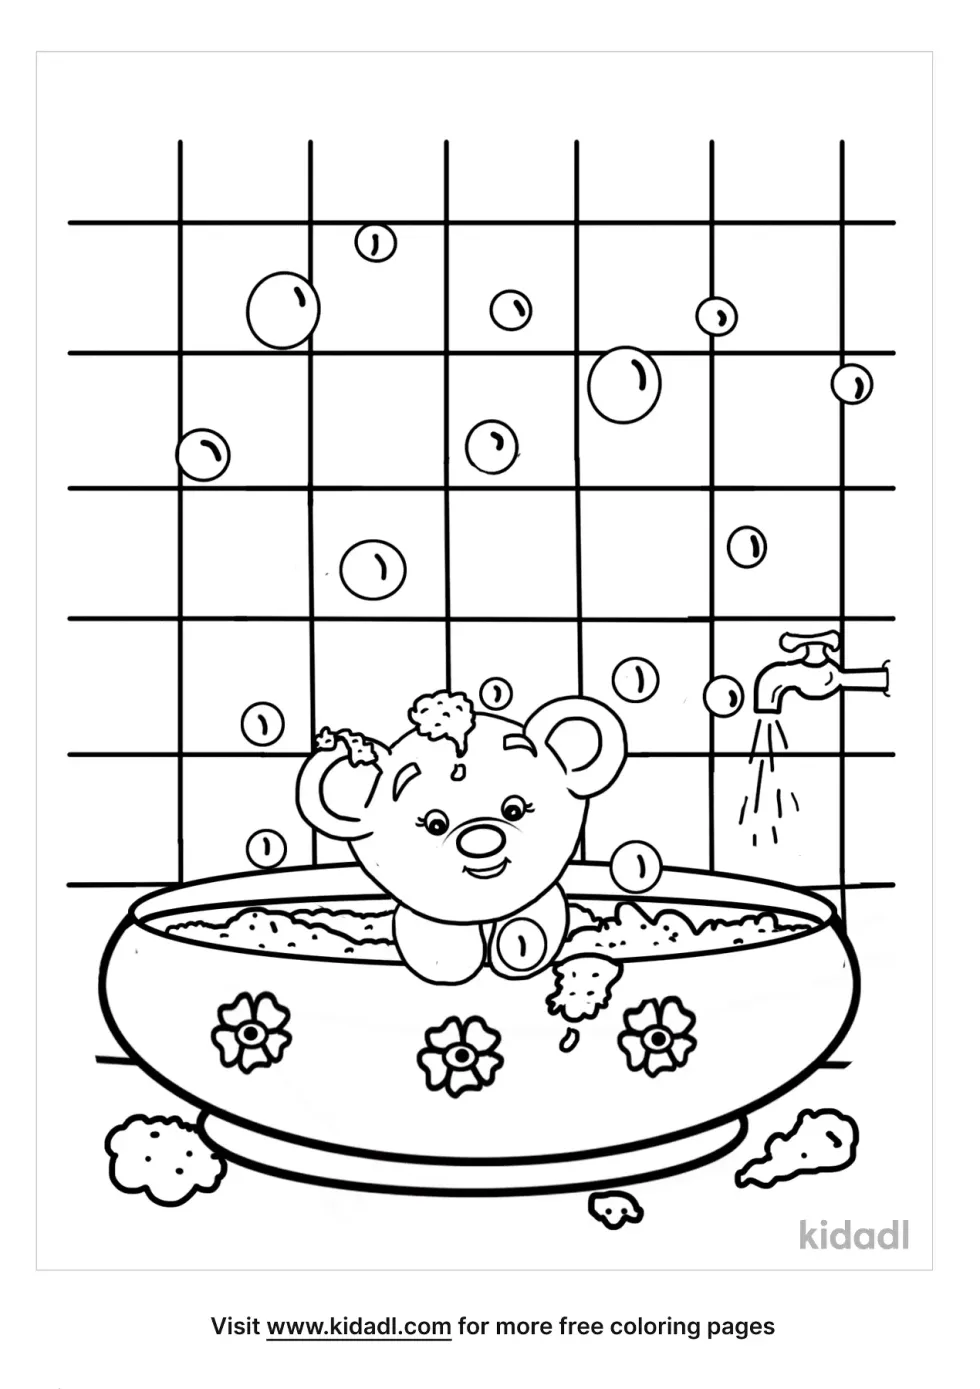 Shower Cartoon Coloring Page